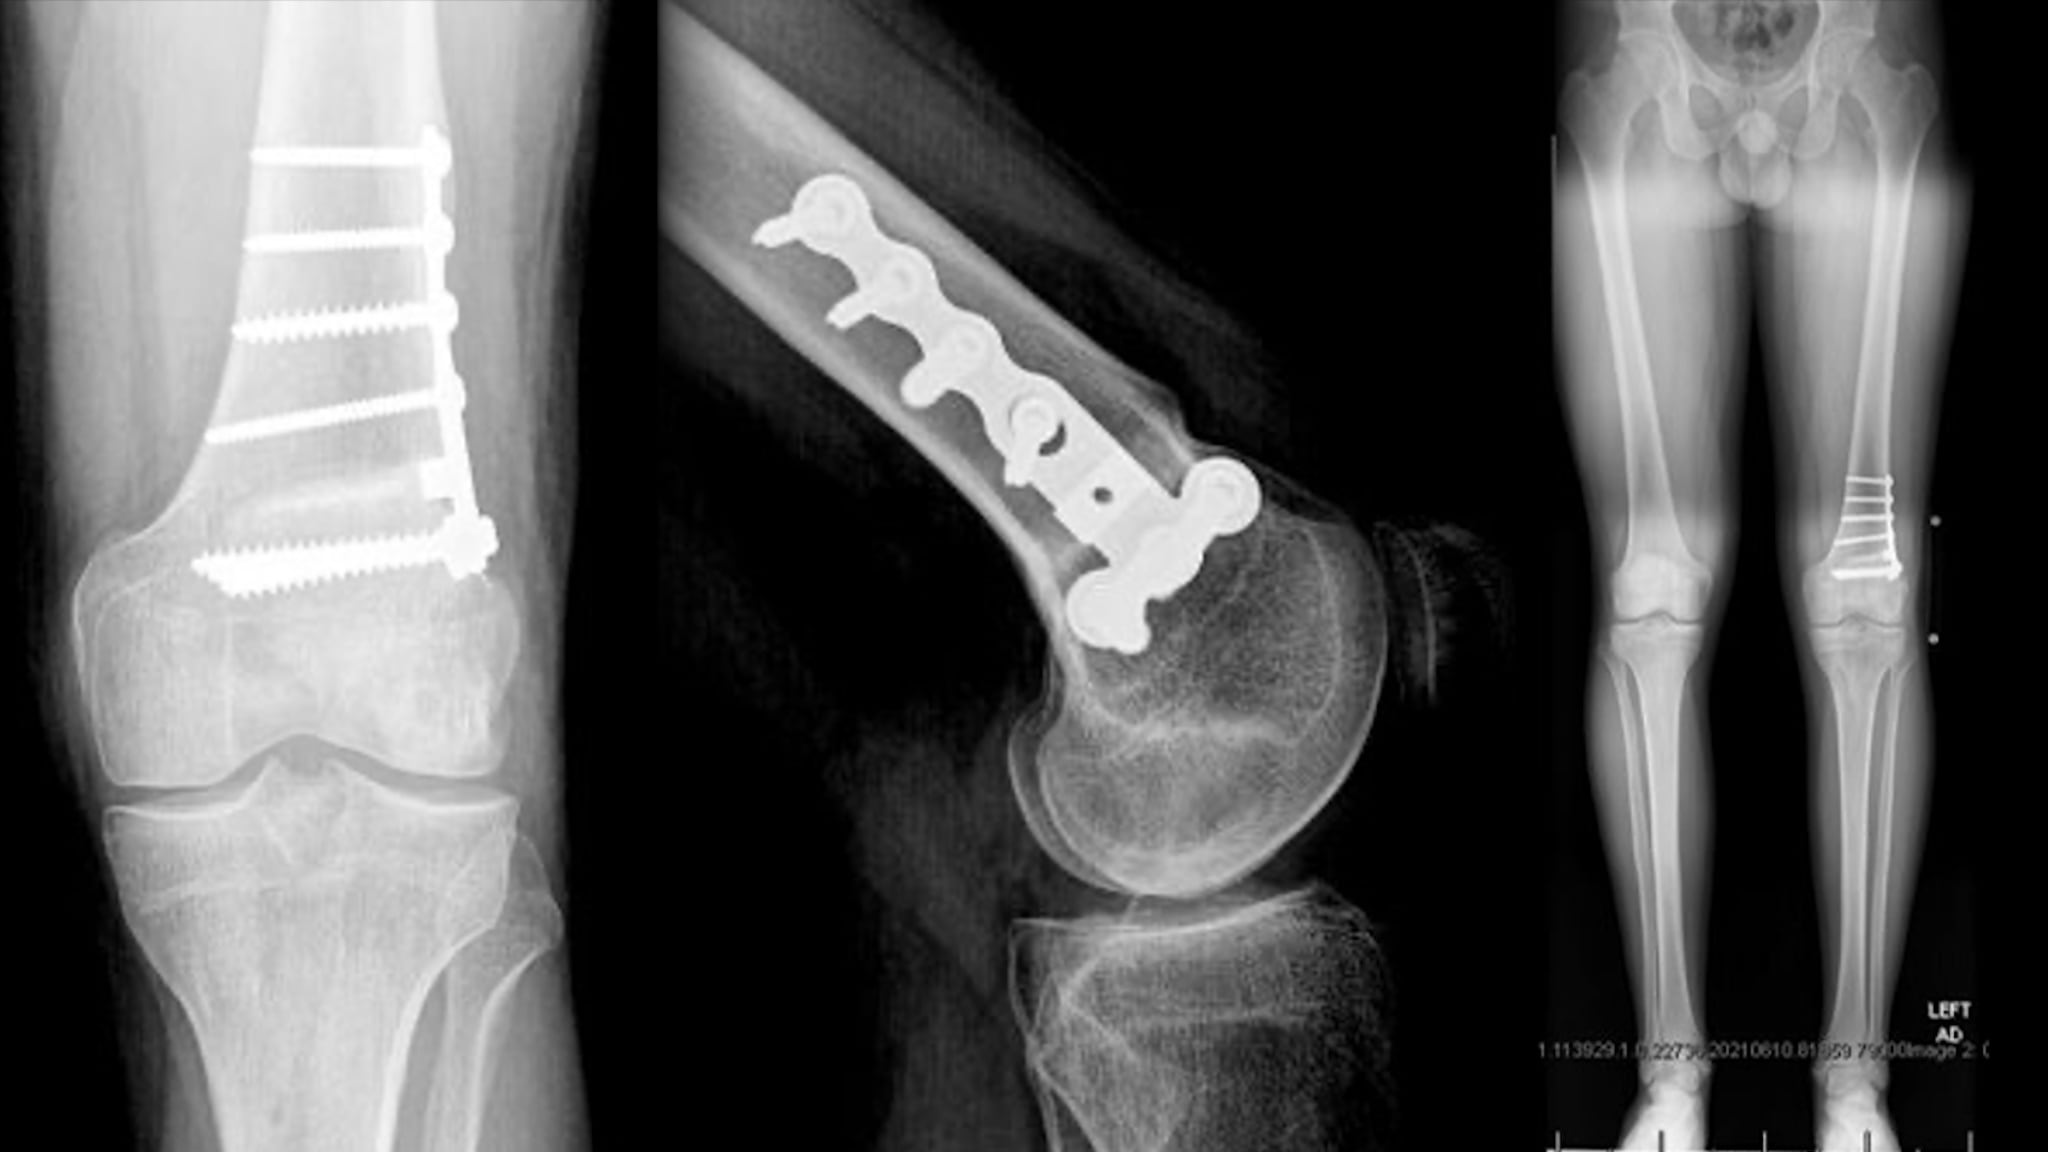 Lateral Meniscal Allograft Transplantation With Distal Femoral Osteotomy and Fresh Osteochondral Allograft Transplantation